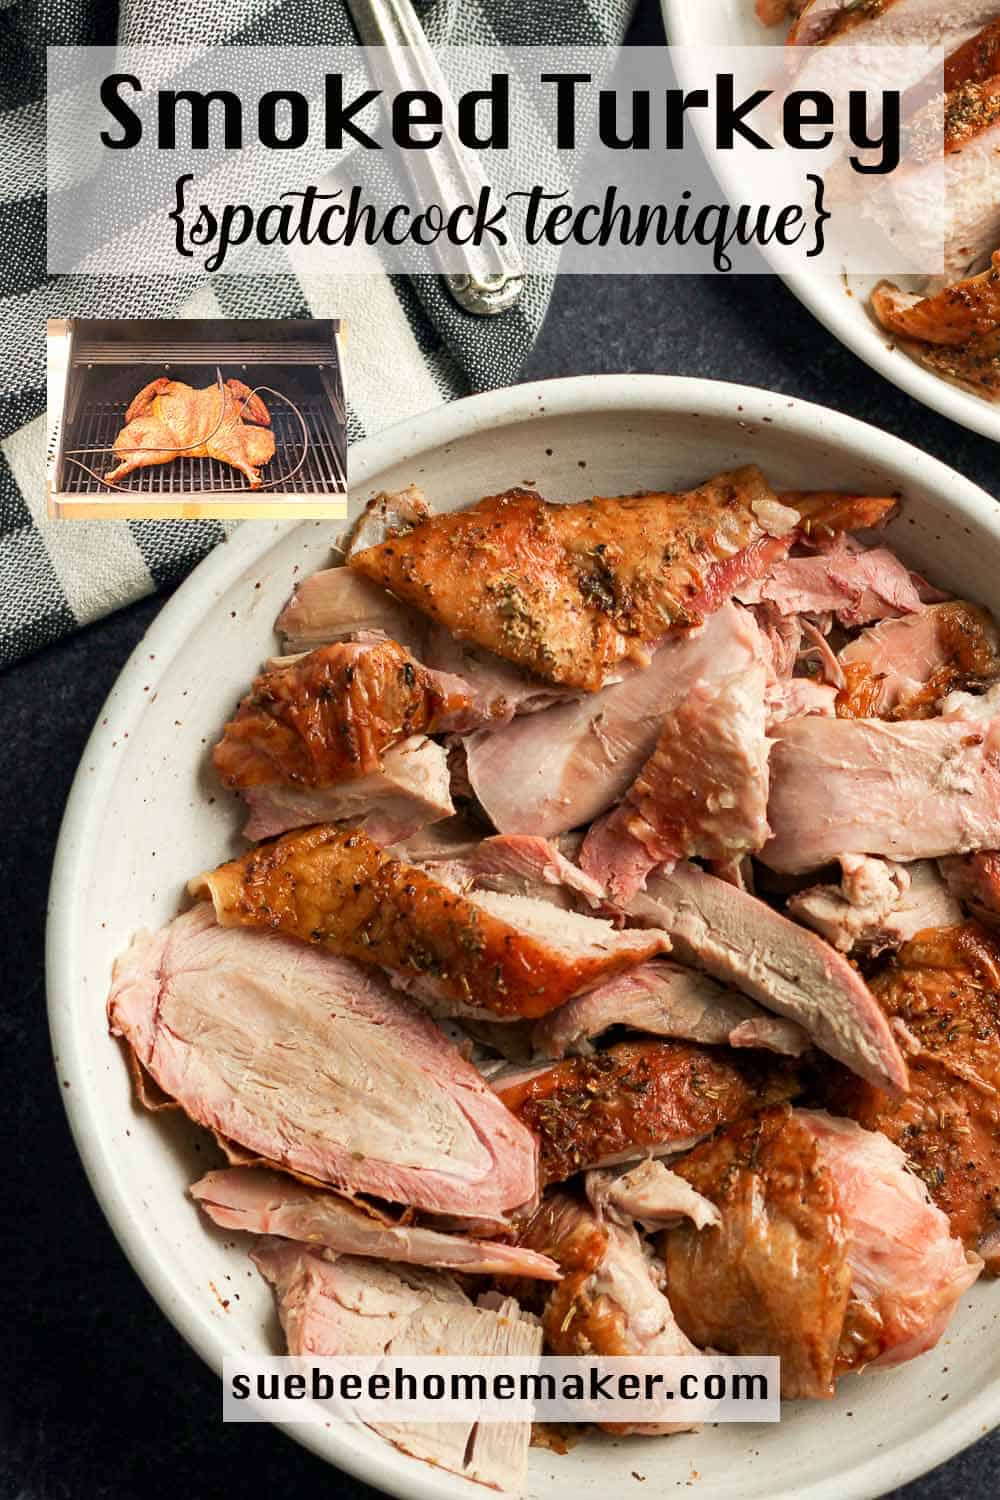 A bowl of sliced dark smoked turkey using the spatchcock technique.